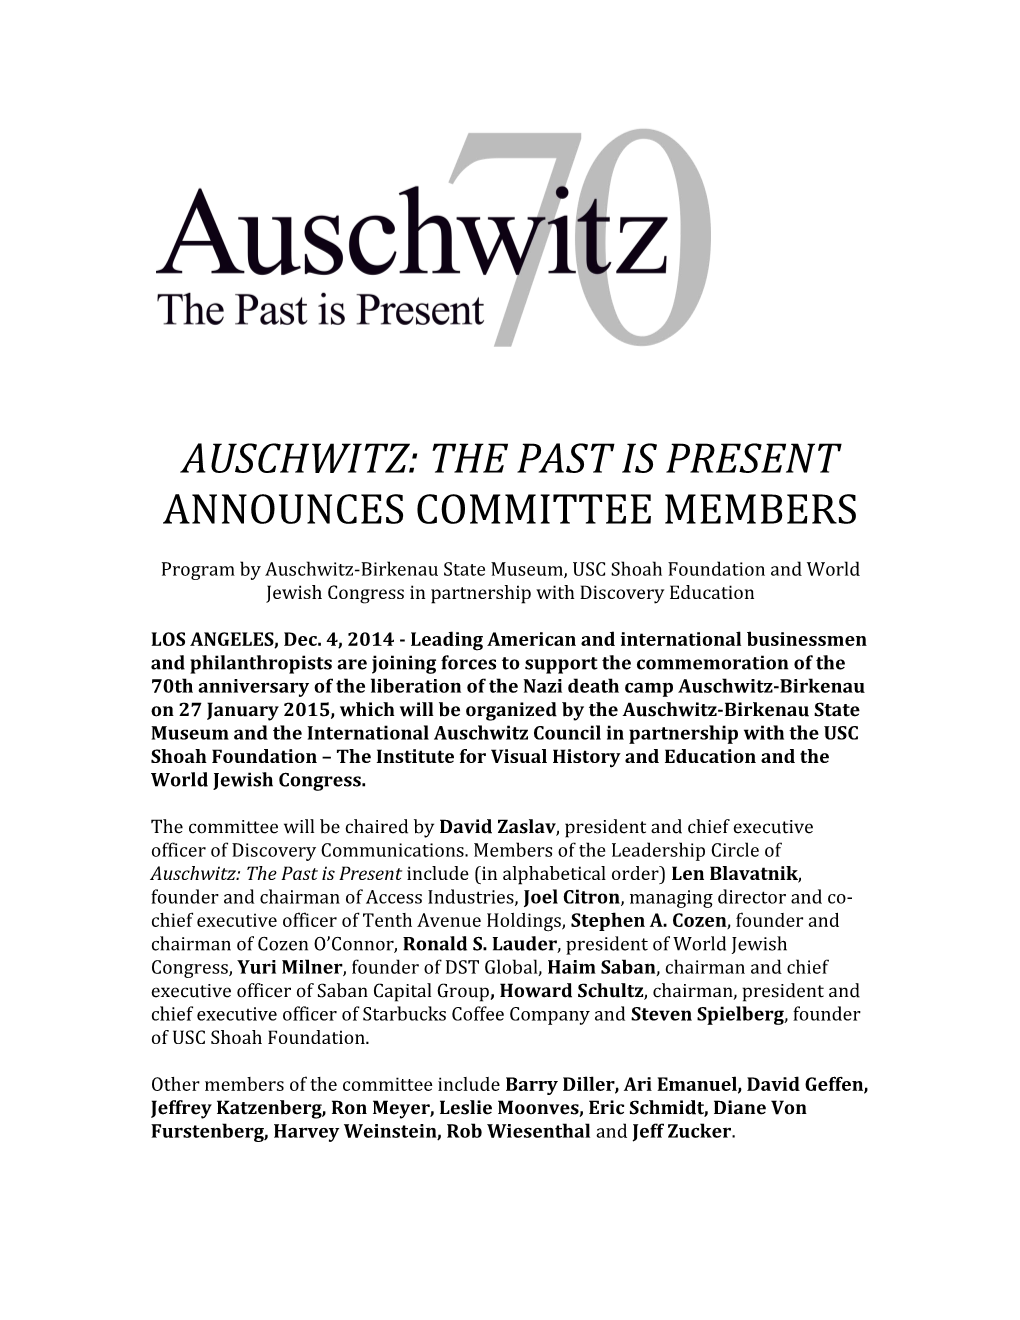 Auschwitz: the Past Is Present Announces Committee Members